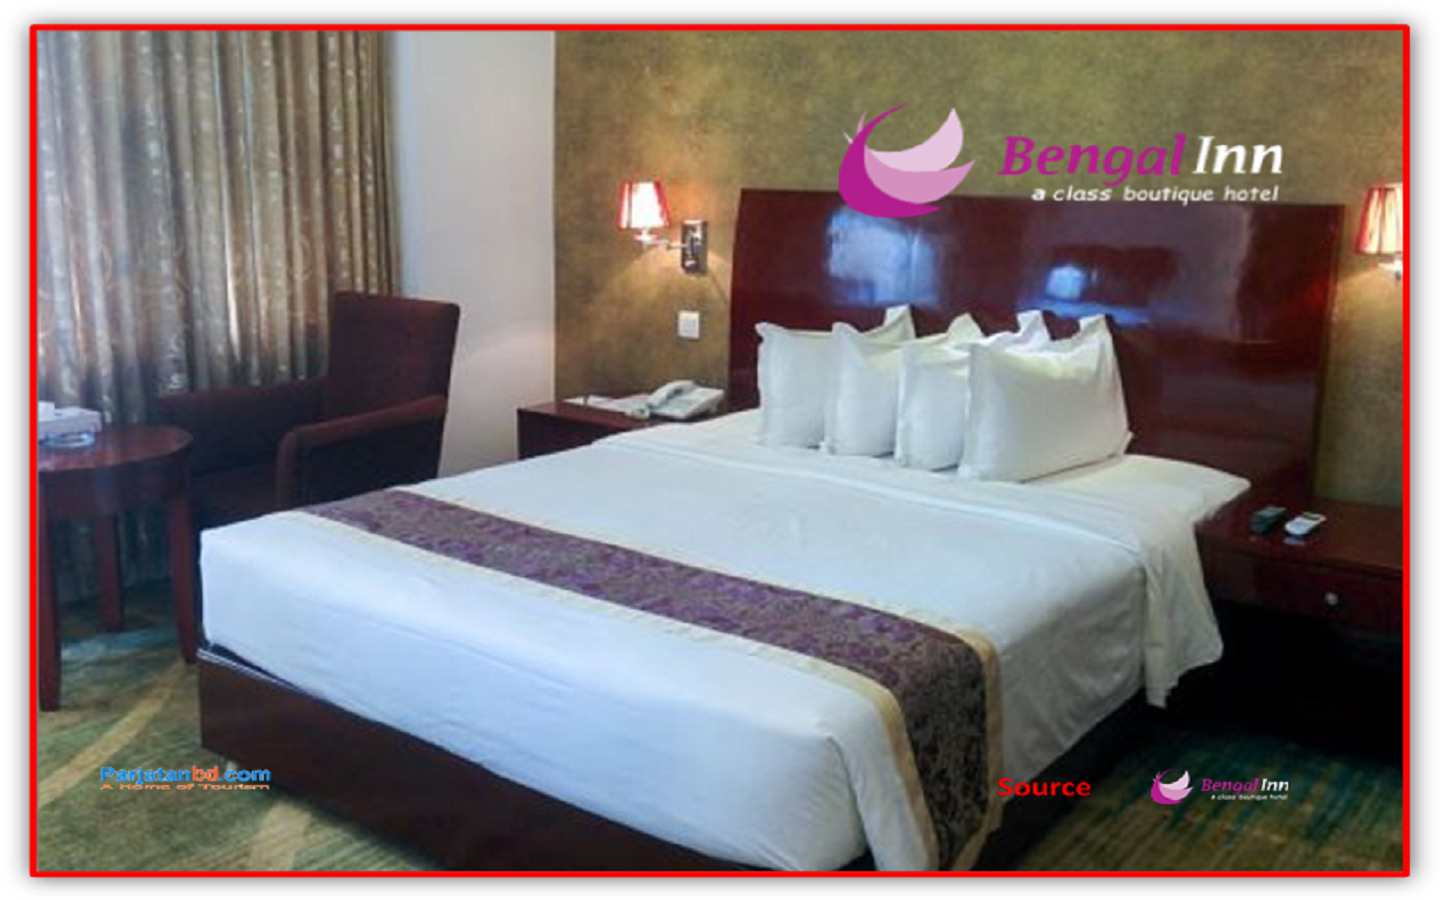 Room Super Deluxe Single -1, Bengal Inn (A Class Boutique Hotel), Gulshan 1